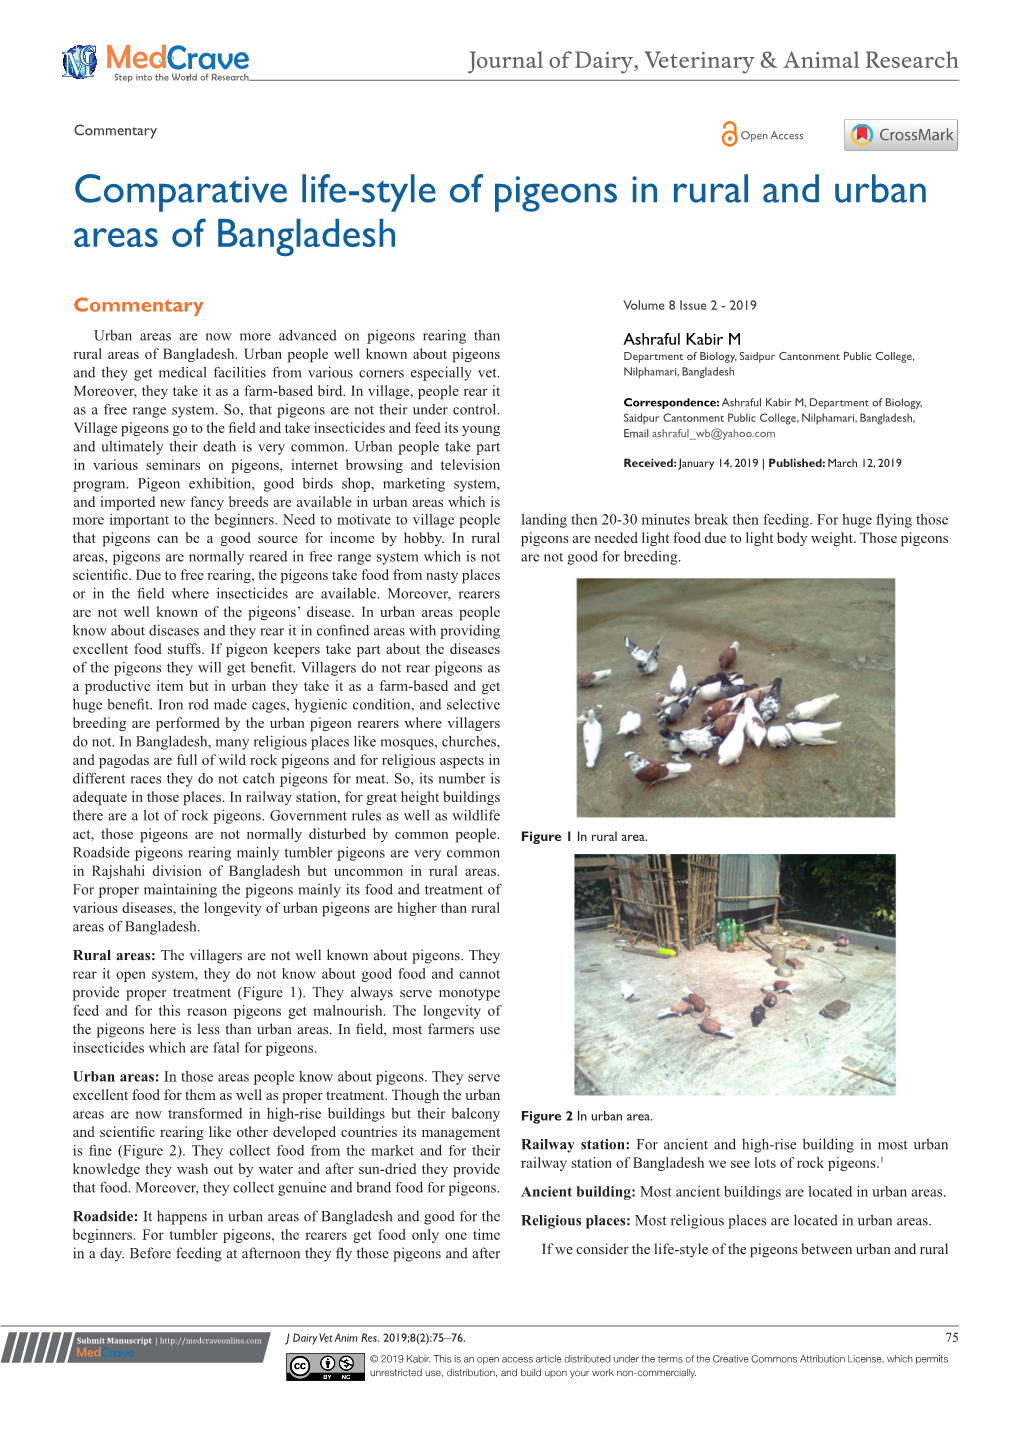 Comparative Life-Style of Pigeons in Rural and Urban Areas of Bangladesh